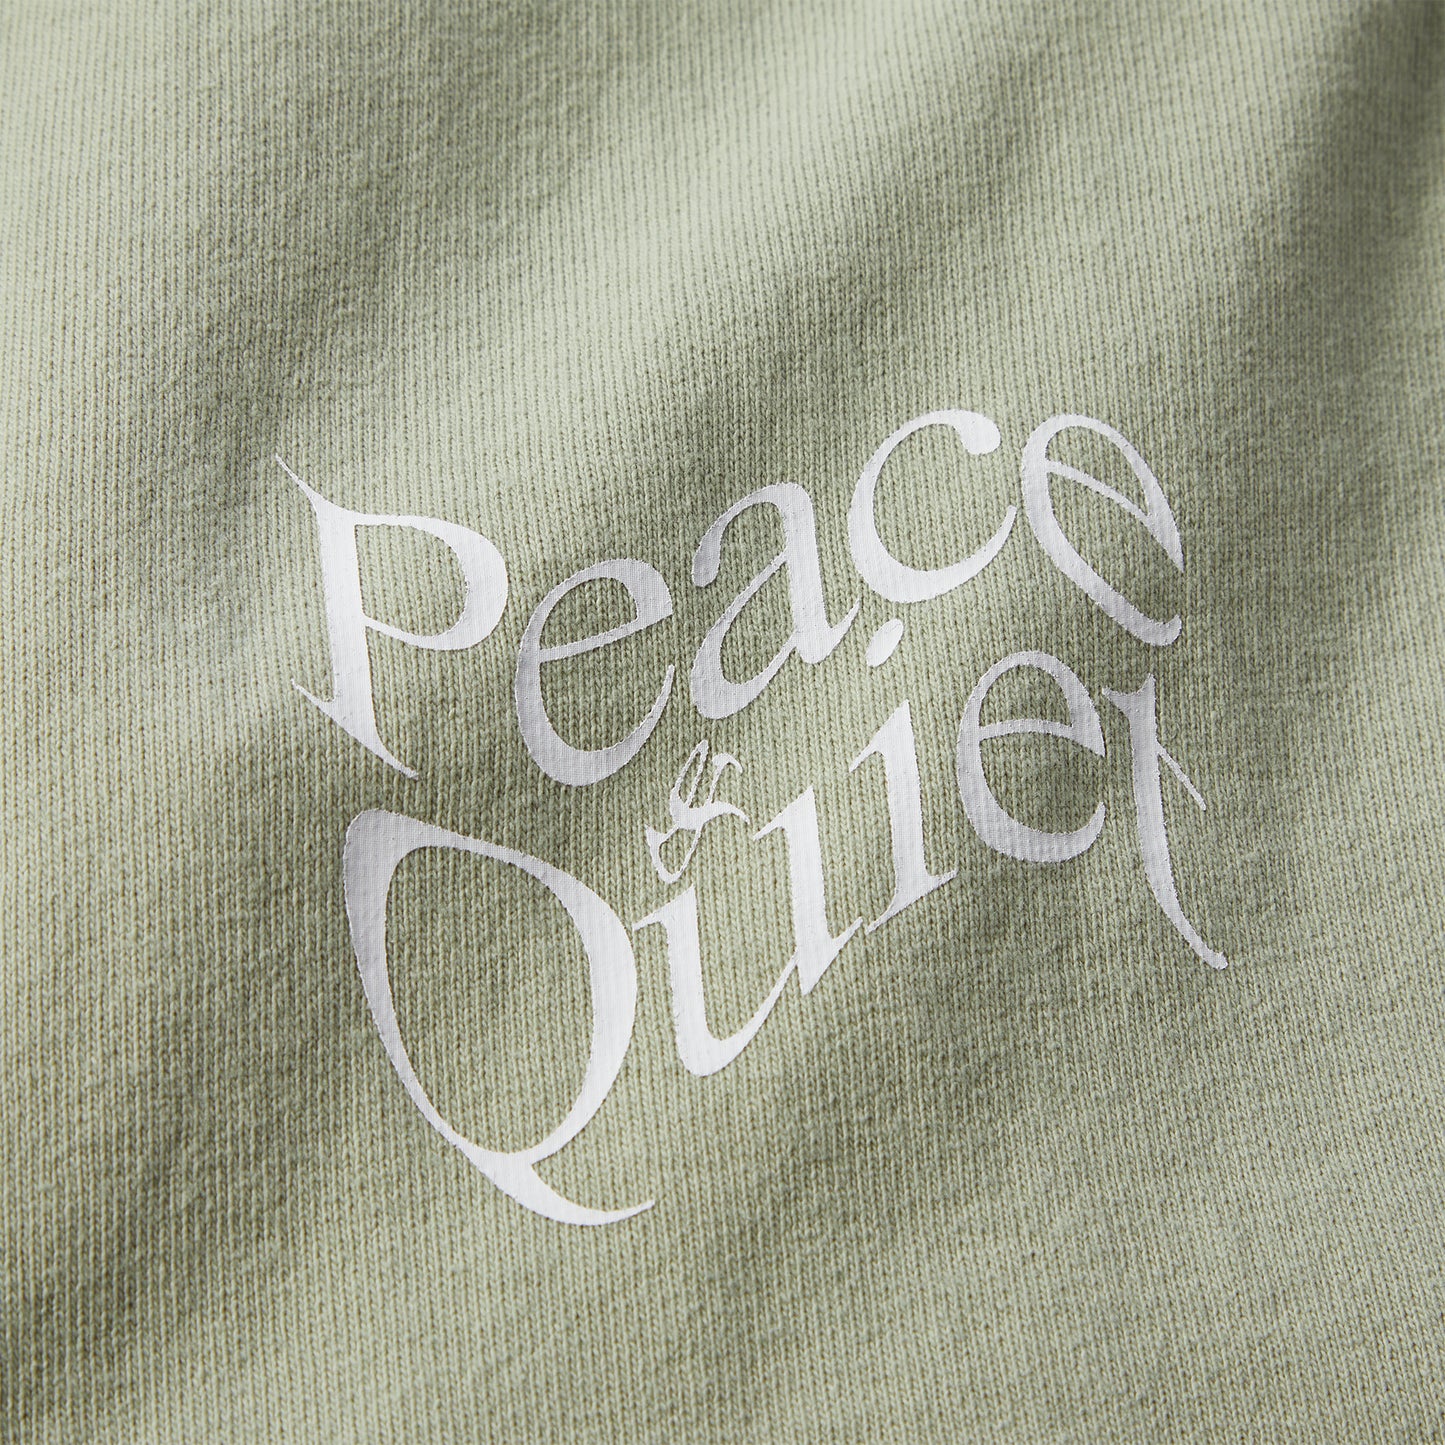 Museum of Peace and Quiet Warped Sweat Shorts (SAGE)